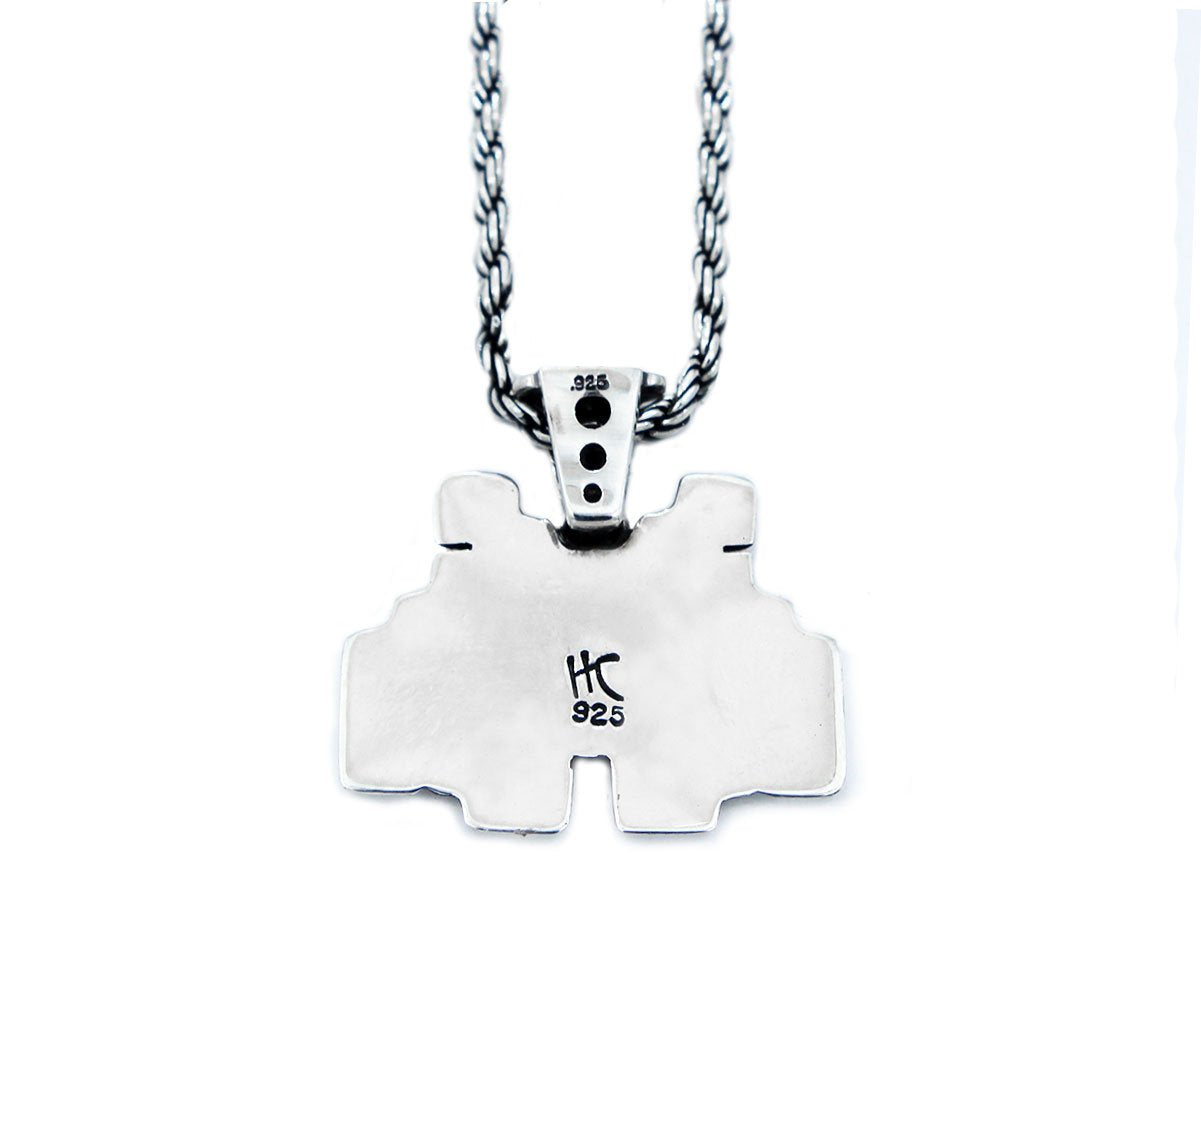 back view of the smiley invader pendant in silver on a white background